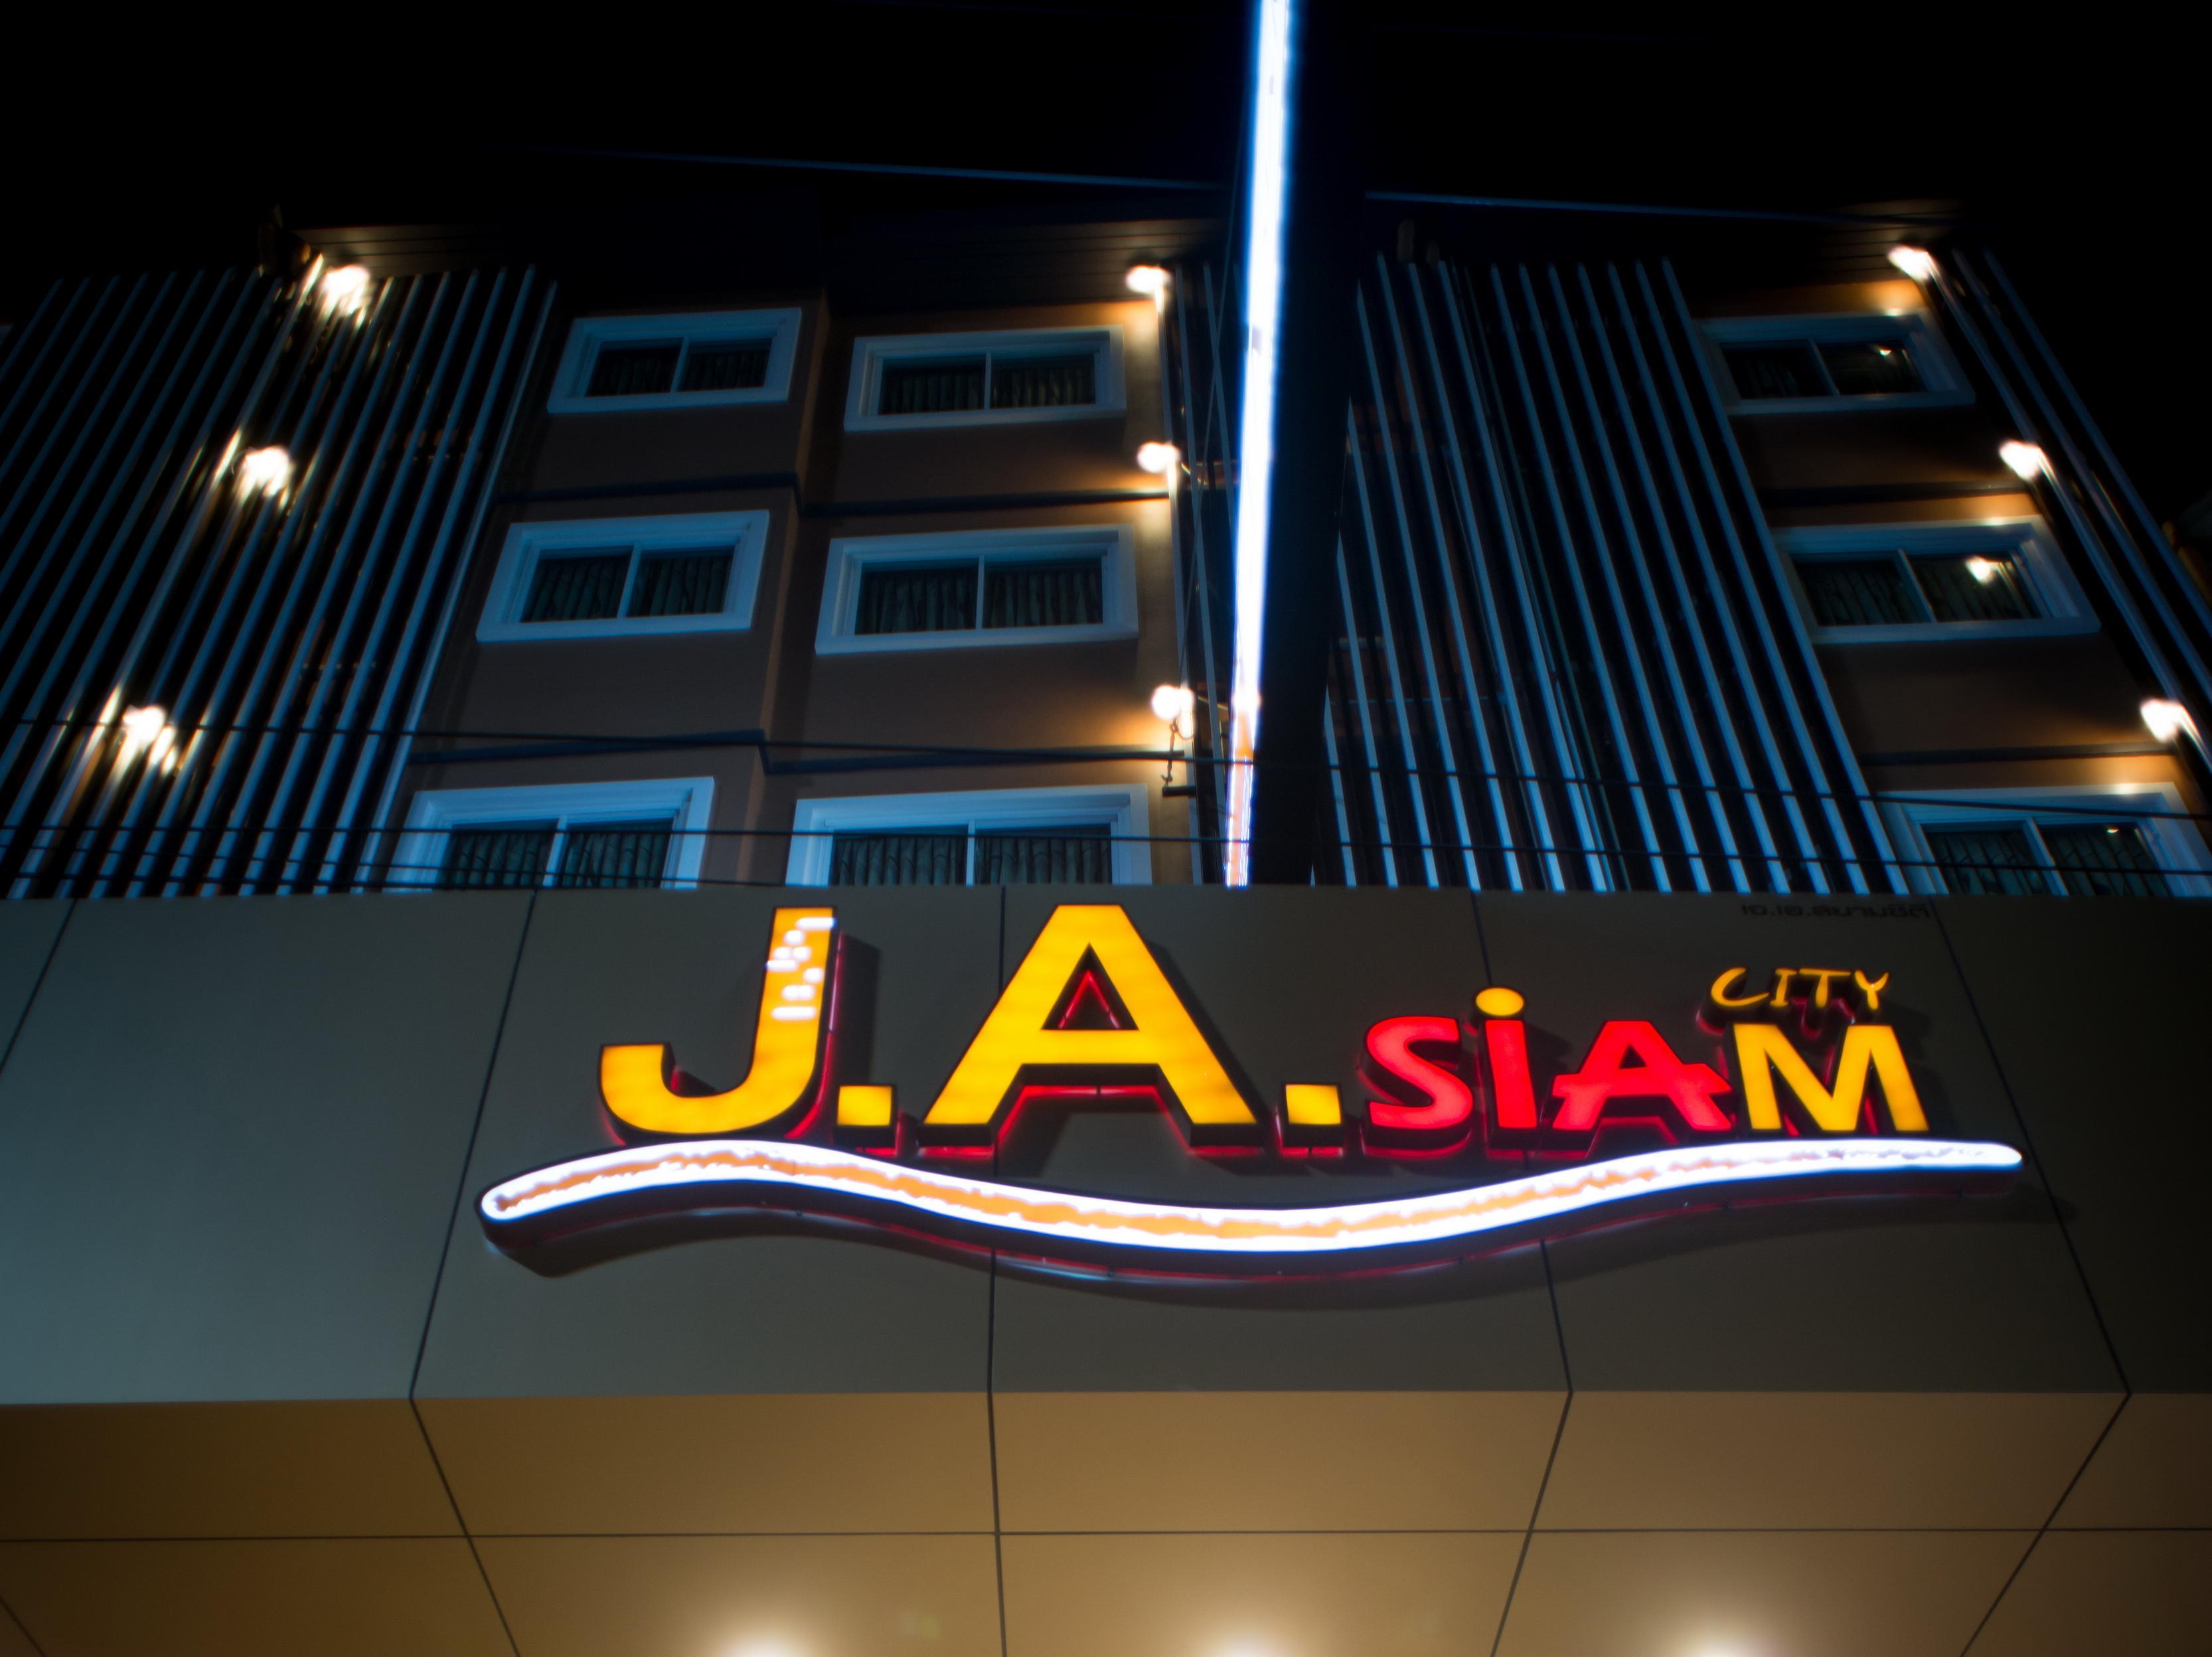 J.A. Siam City Pattaya Hotel Thailand FAQ 2016, What facilities are there in J.A. Siam City Pattaya Hotel Thailand 2016, What Languages Spoken are Supported in J.A. Siam City Pattaya Hotel Thailand 2016, Which payment cards are accepted in J.A. Siam City Pattaya Hotel Thailand , Thailand J.A. Siam City Pattaya Hotel room facilities and services Q&A 2016, Thailand J.A. Siam City Pattaya Hotel online booking services 2016, Thailand J.A. Siam City Pattaya Hotel address 2016, Thailand J.A. Siam City Pattaya Hotel telephone number 2016,Thailand J.A. Siam City Pattaya Hotel map 2016, Thailand J.A. Siam City Pattaya Hotel traffic guide 2016, how to go Thailand J.A. Siam City Pattaya Hotel, Thailand J.A. Siam City Pattaya Hotel booking online 2016, Thailand J.A. Siam City Pattaya Hotel room types 2016.